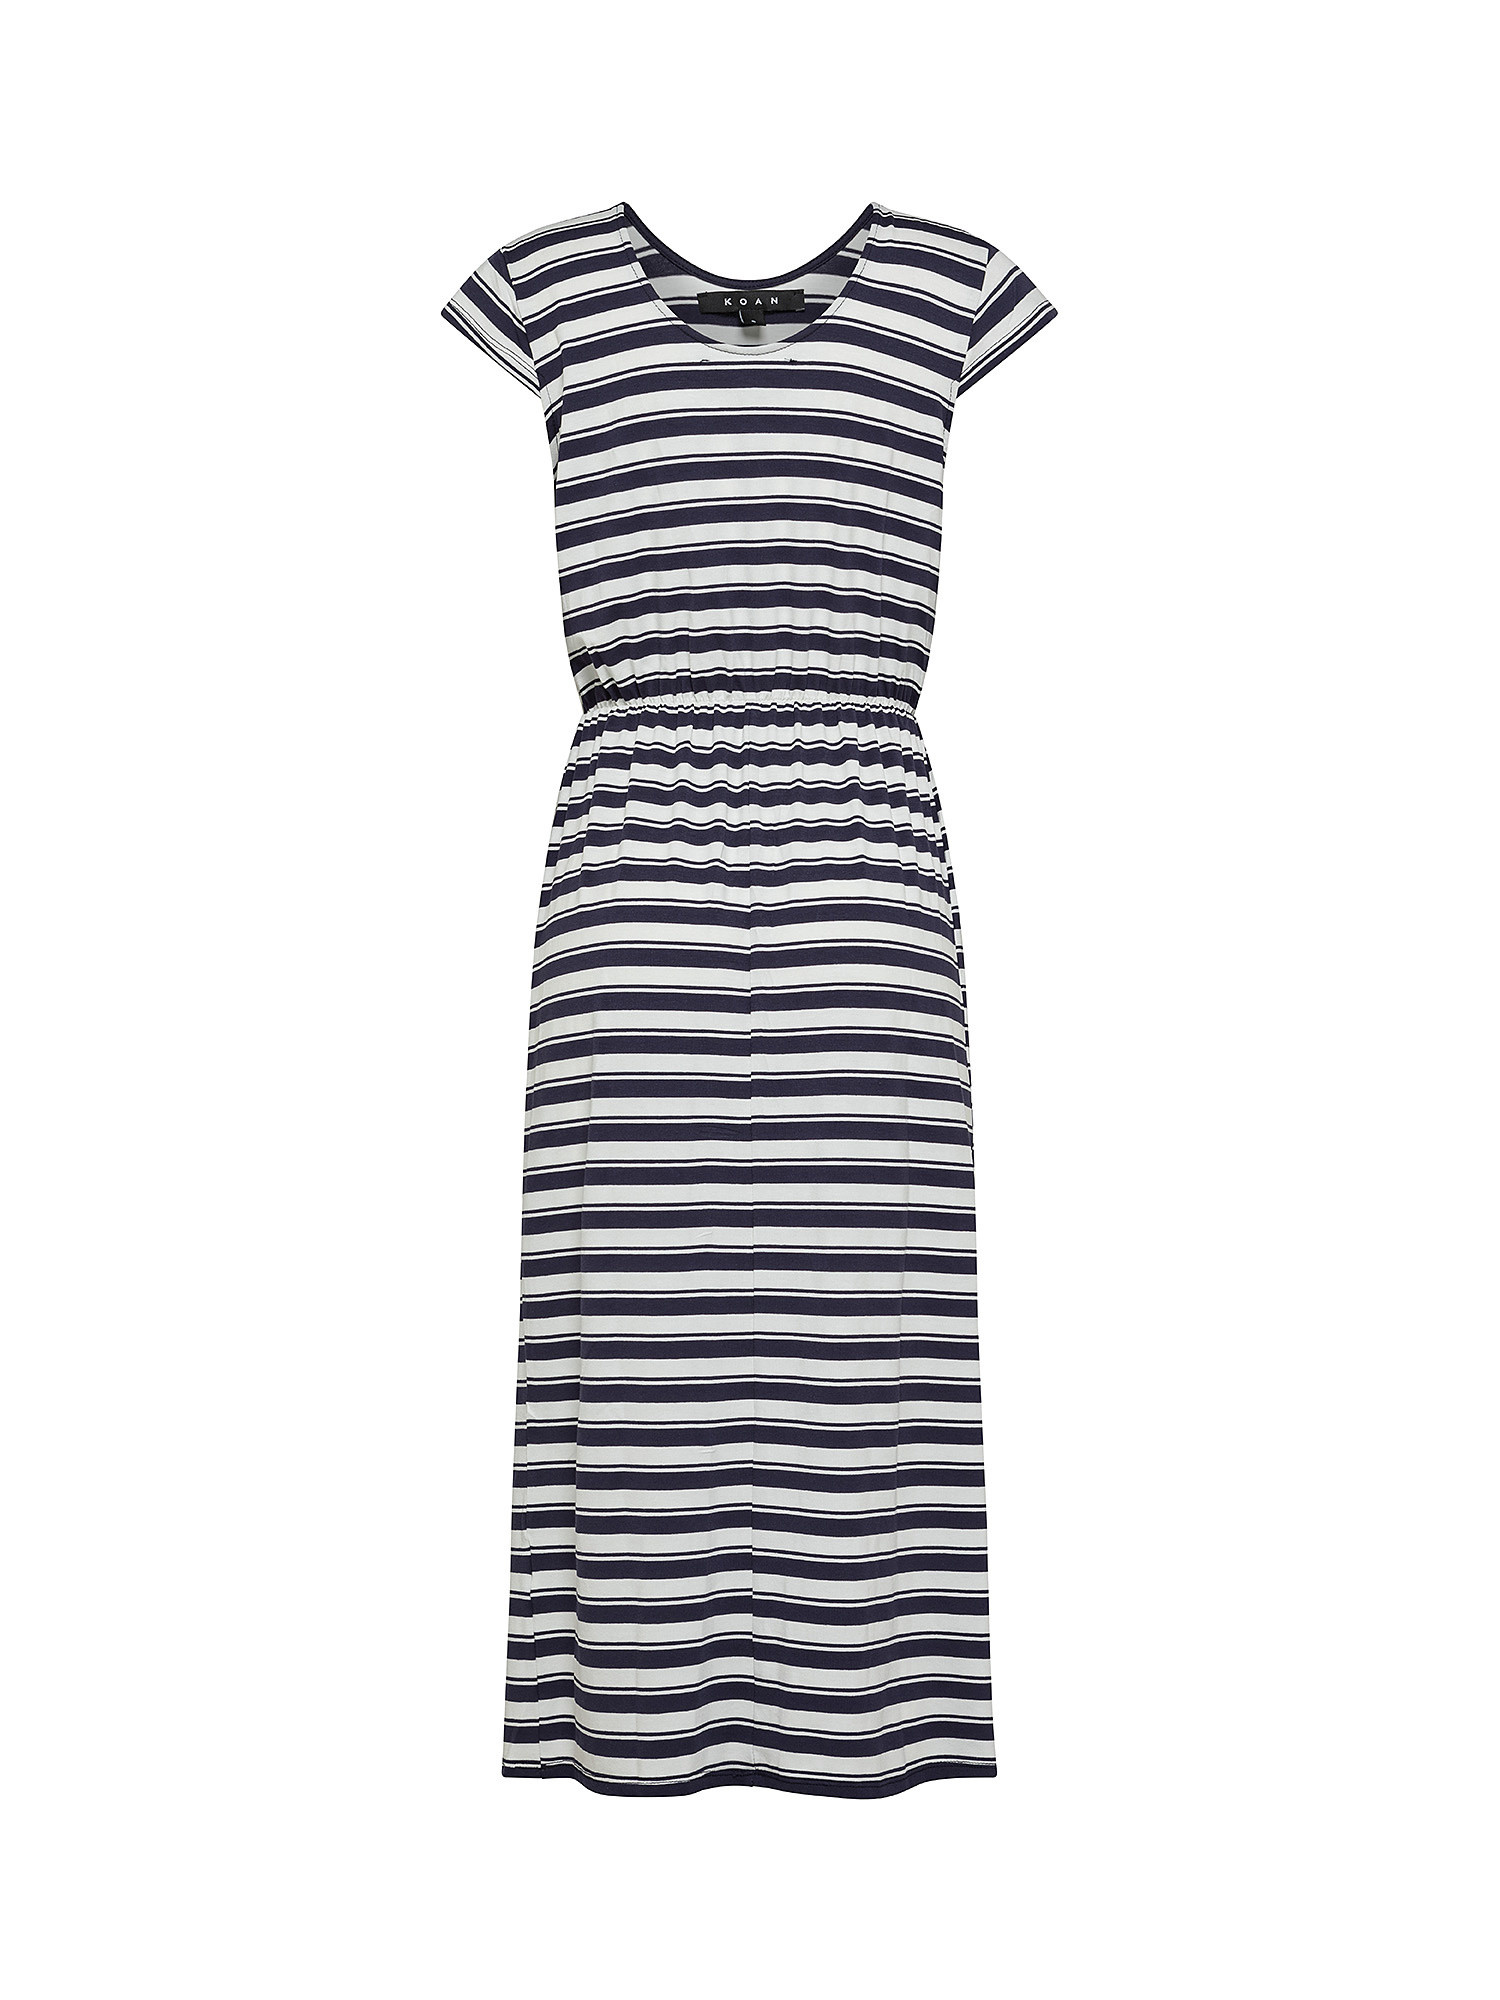 Striped jersey dress, White, large image number 1